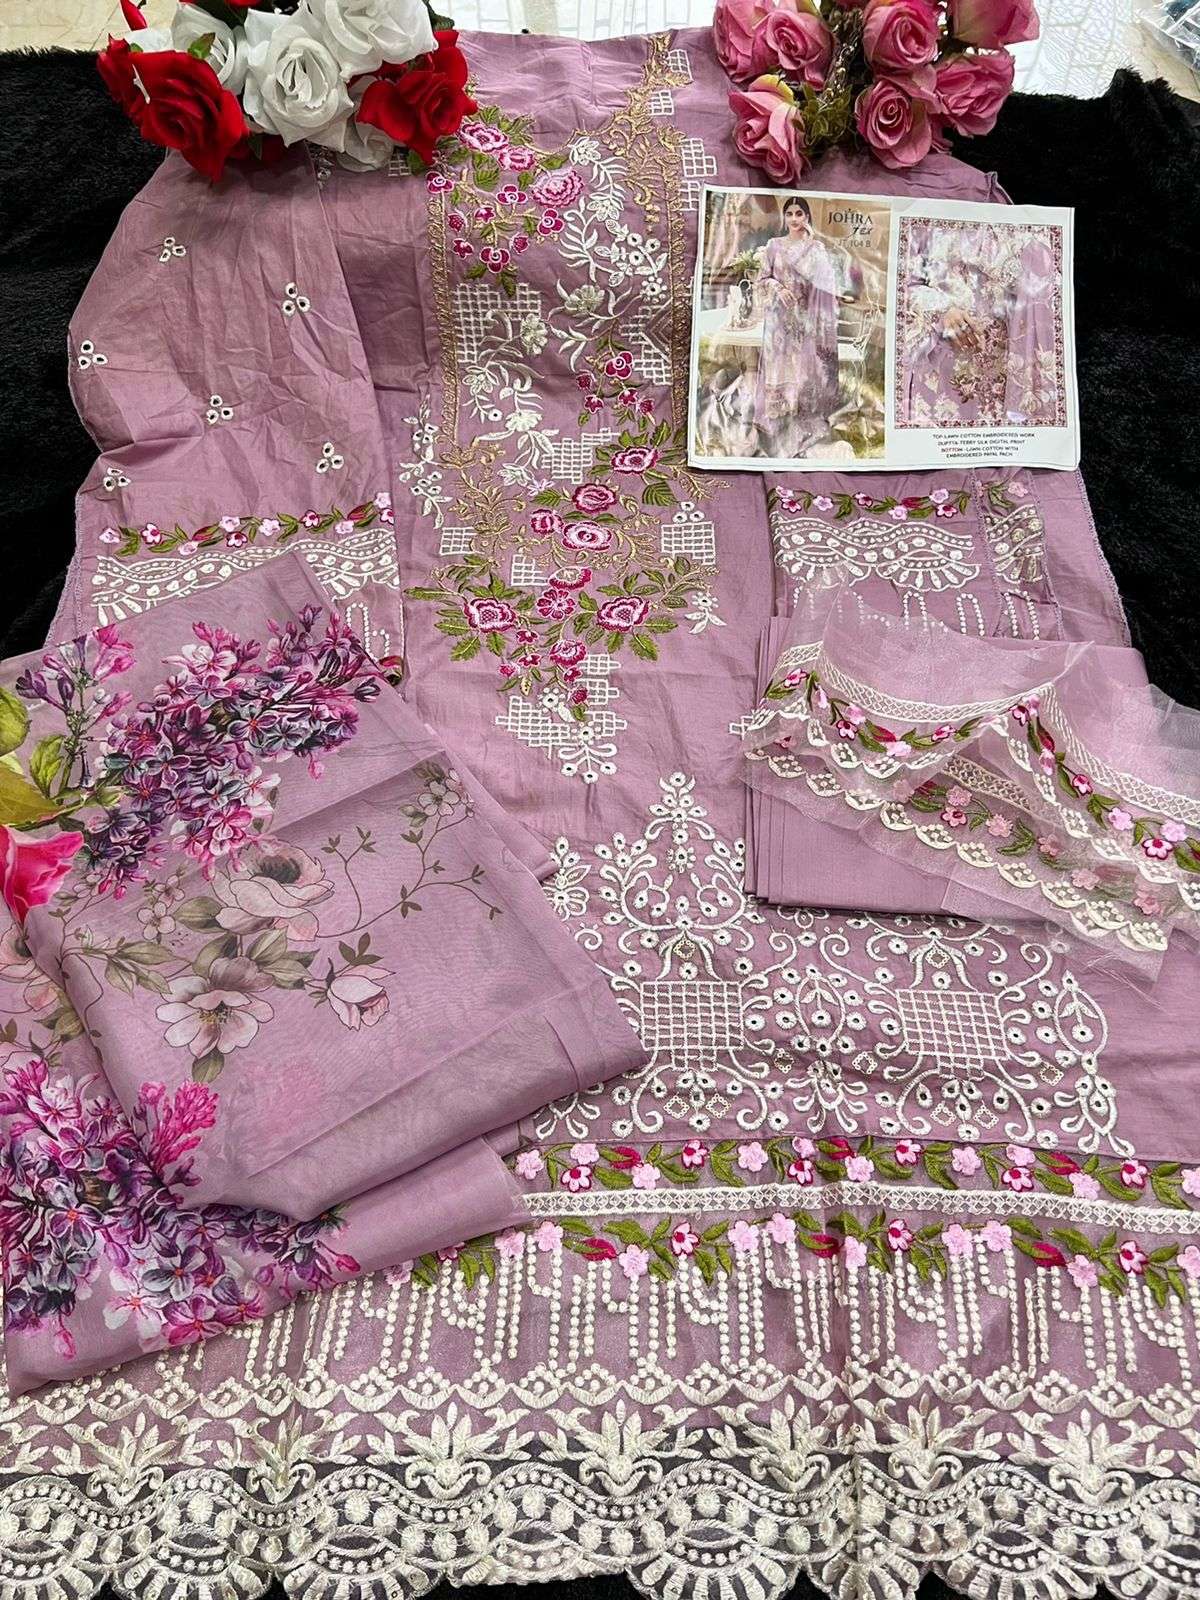 JOHRA HIT DESIGN 104-B BY JOHRA TEX DESIGNER PAKISTANI SUITS BEAUTIFUL STYLISH FANCY COLORFUL PARTY WEAR & OCCASIONAL WEAR COTTON EMBROIDERED DRESSES AT WHOLESALE PRICE